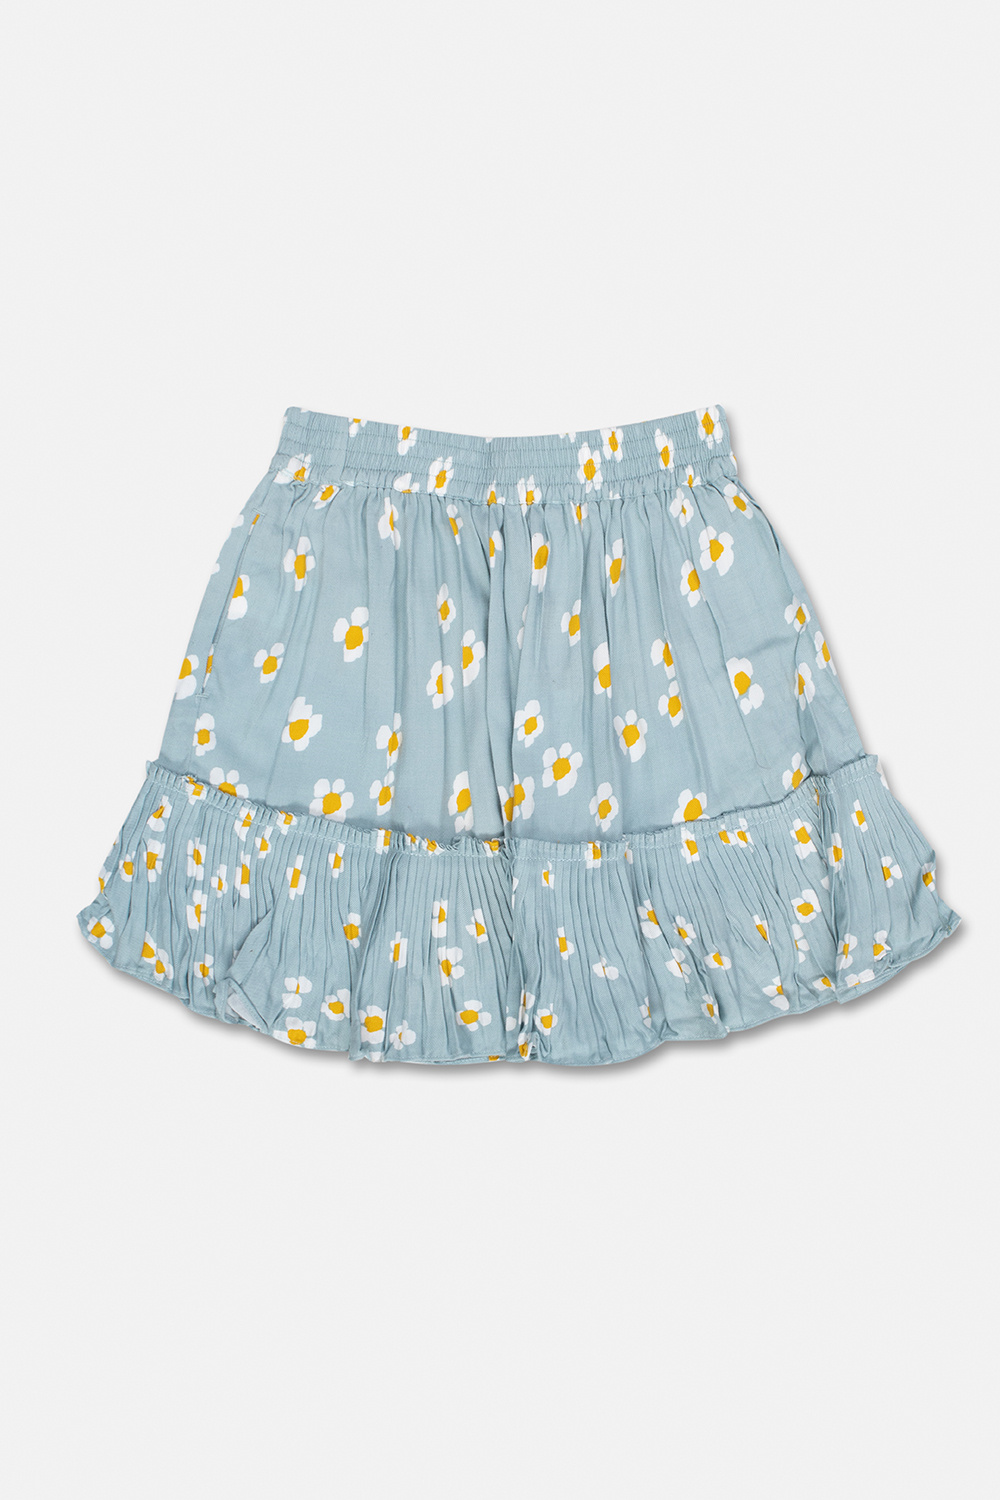 stella red McCartney Kids Skirt with floral motif